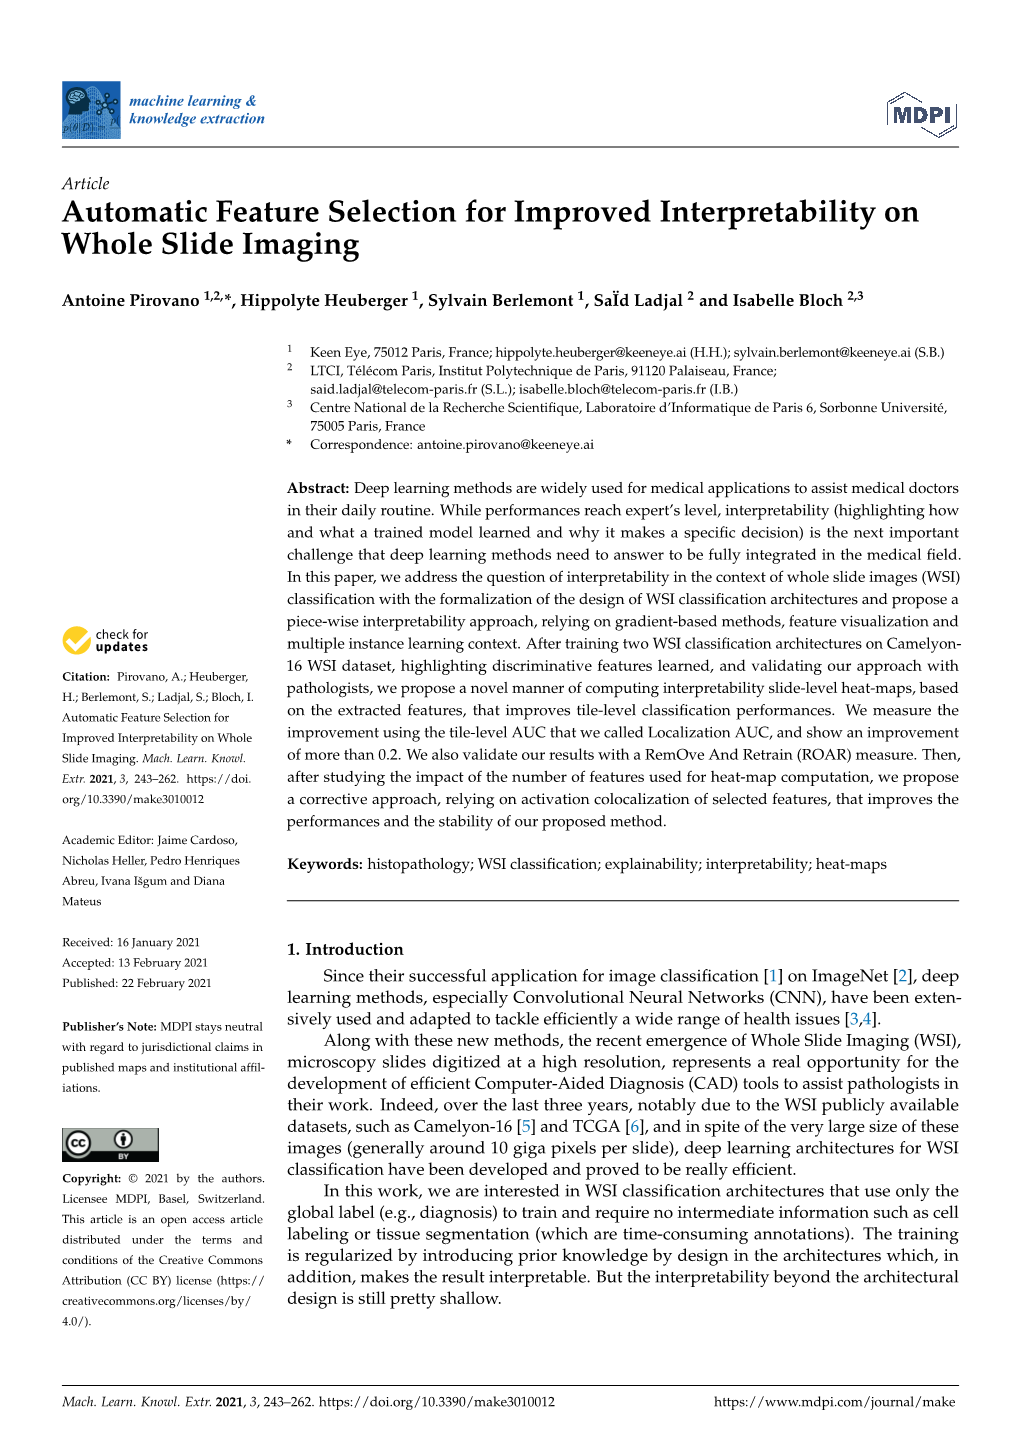 Automatic Feature Selection for Improved Interpretability on Whole Slide Imaging